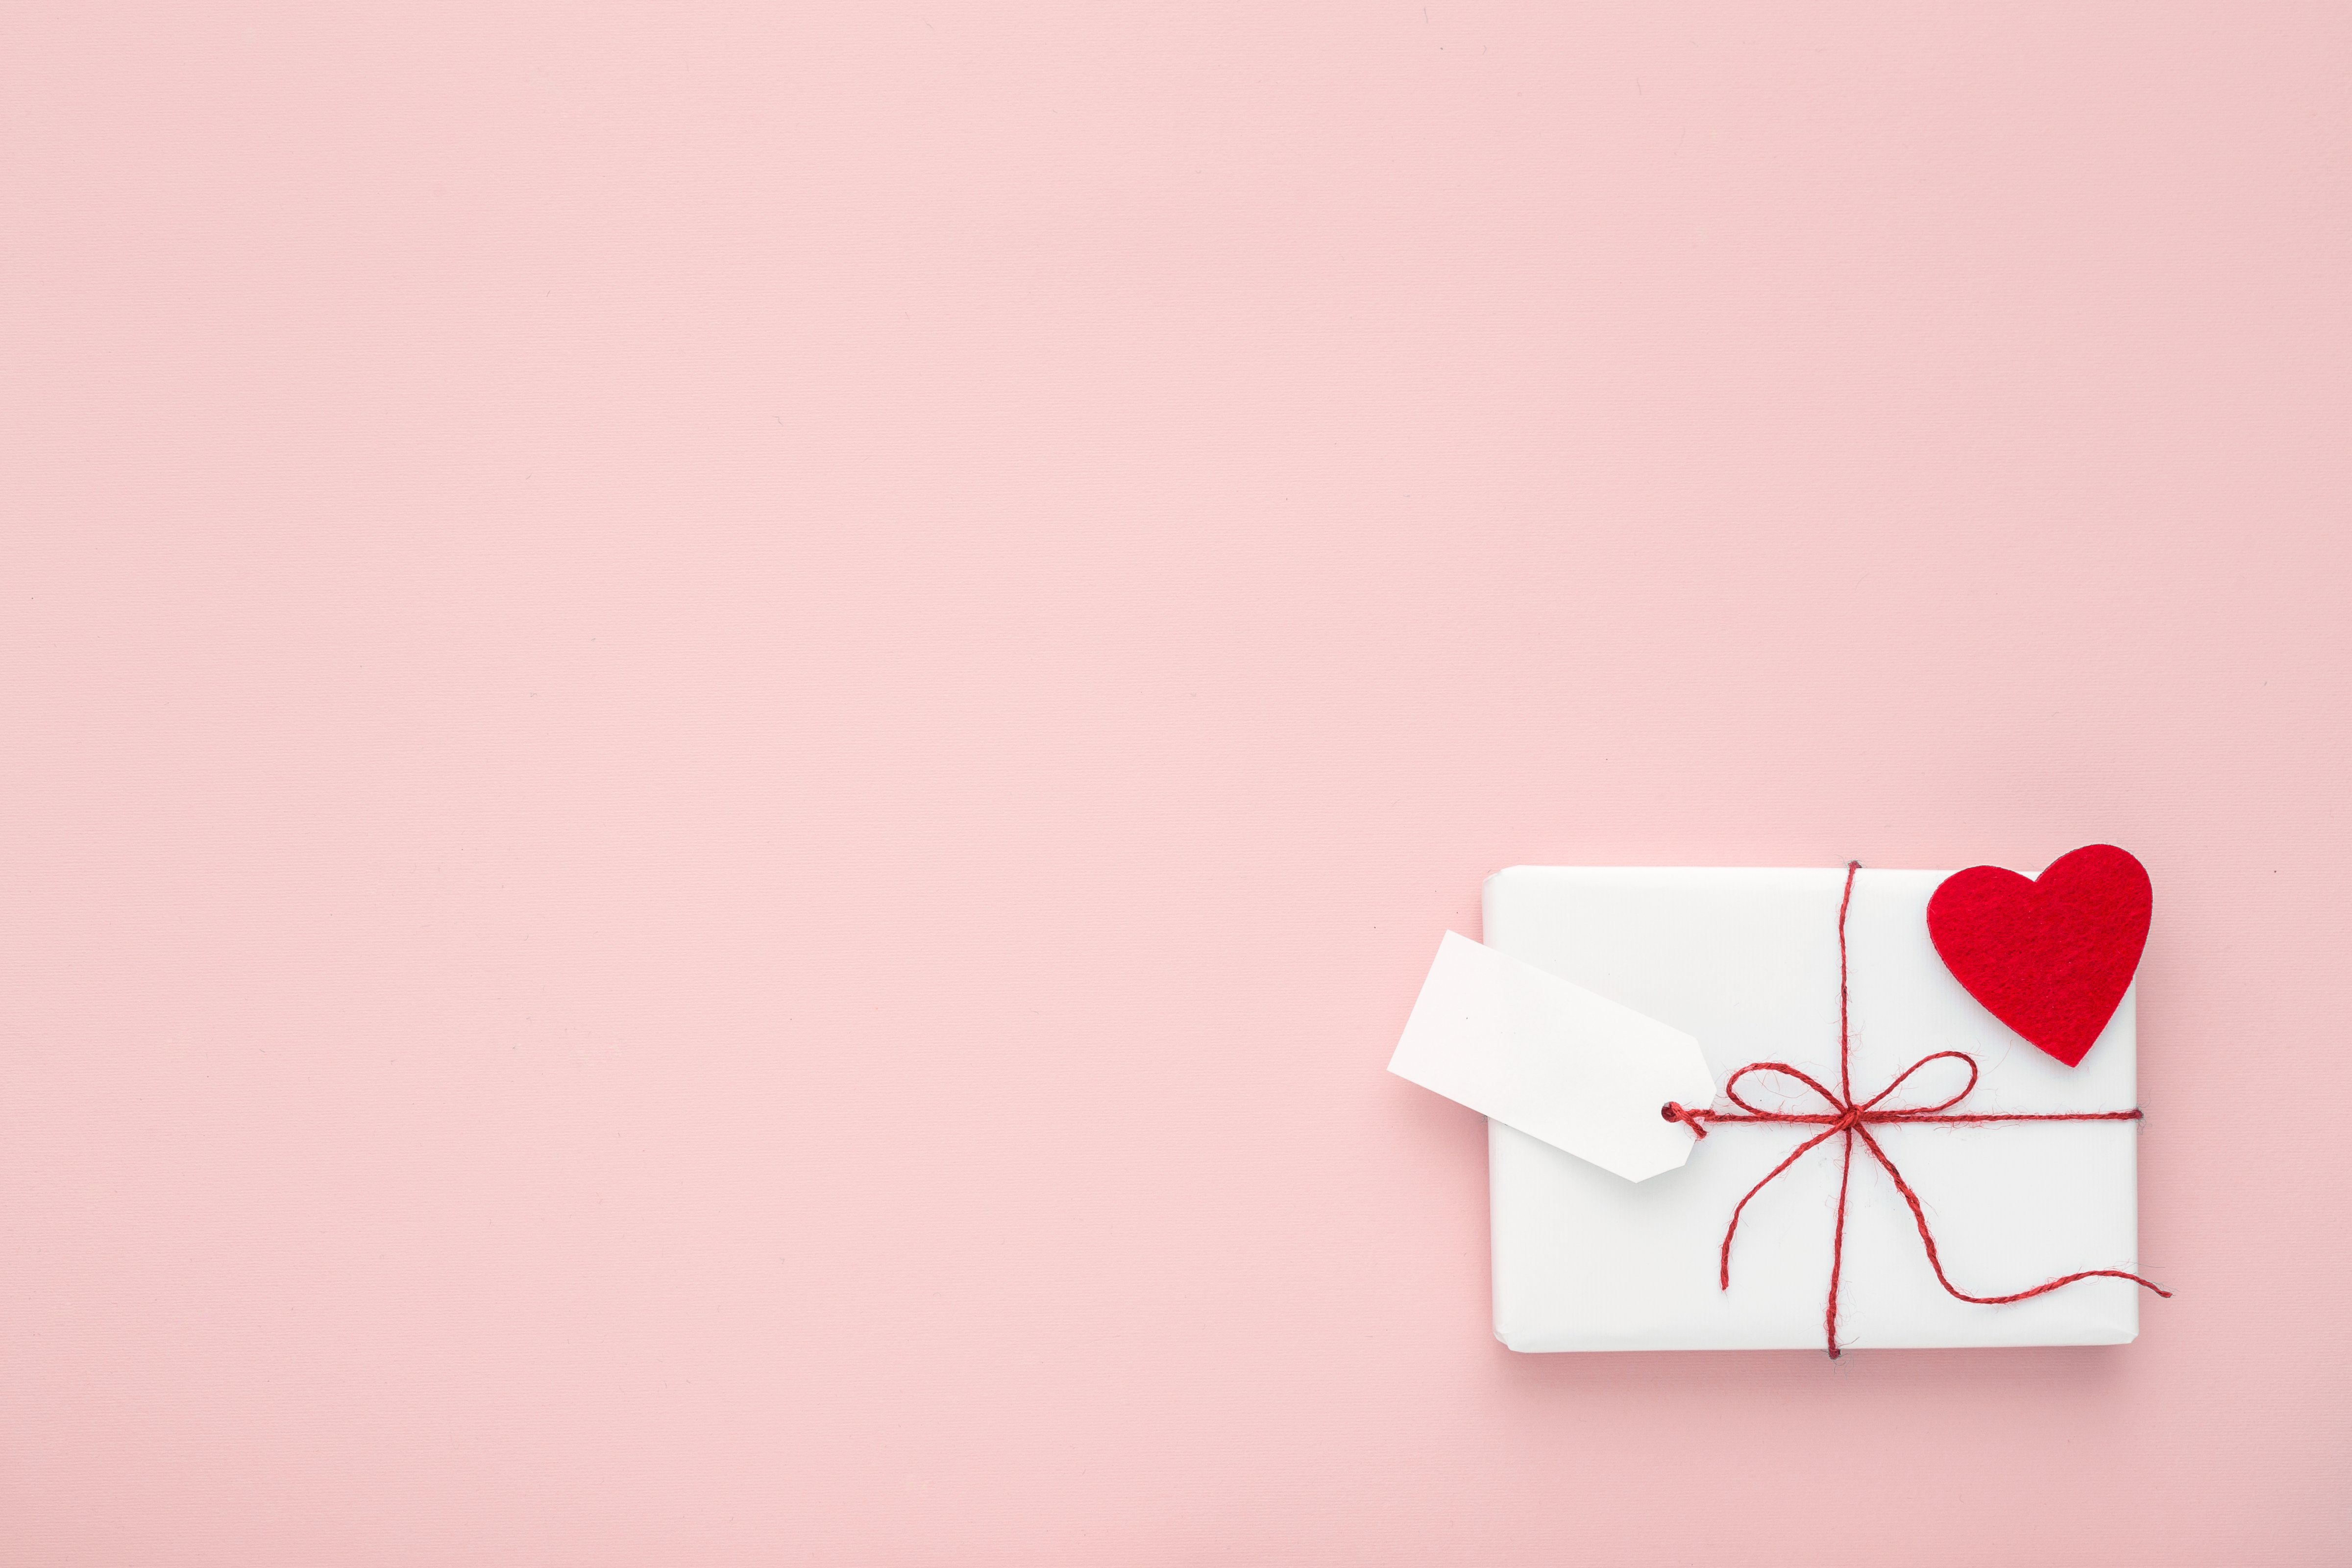 Valentine or birthday white gift with red bow,  blank label decorated with felt heart on pink background. Flat lay. Copy space. (mallmo—Getty Images/iStockphoto)